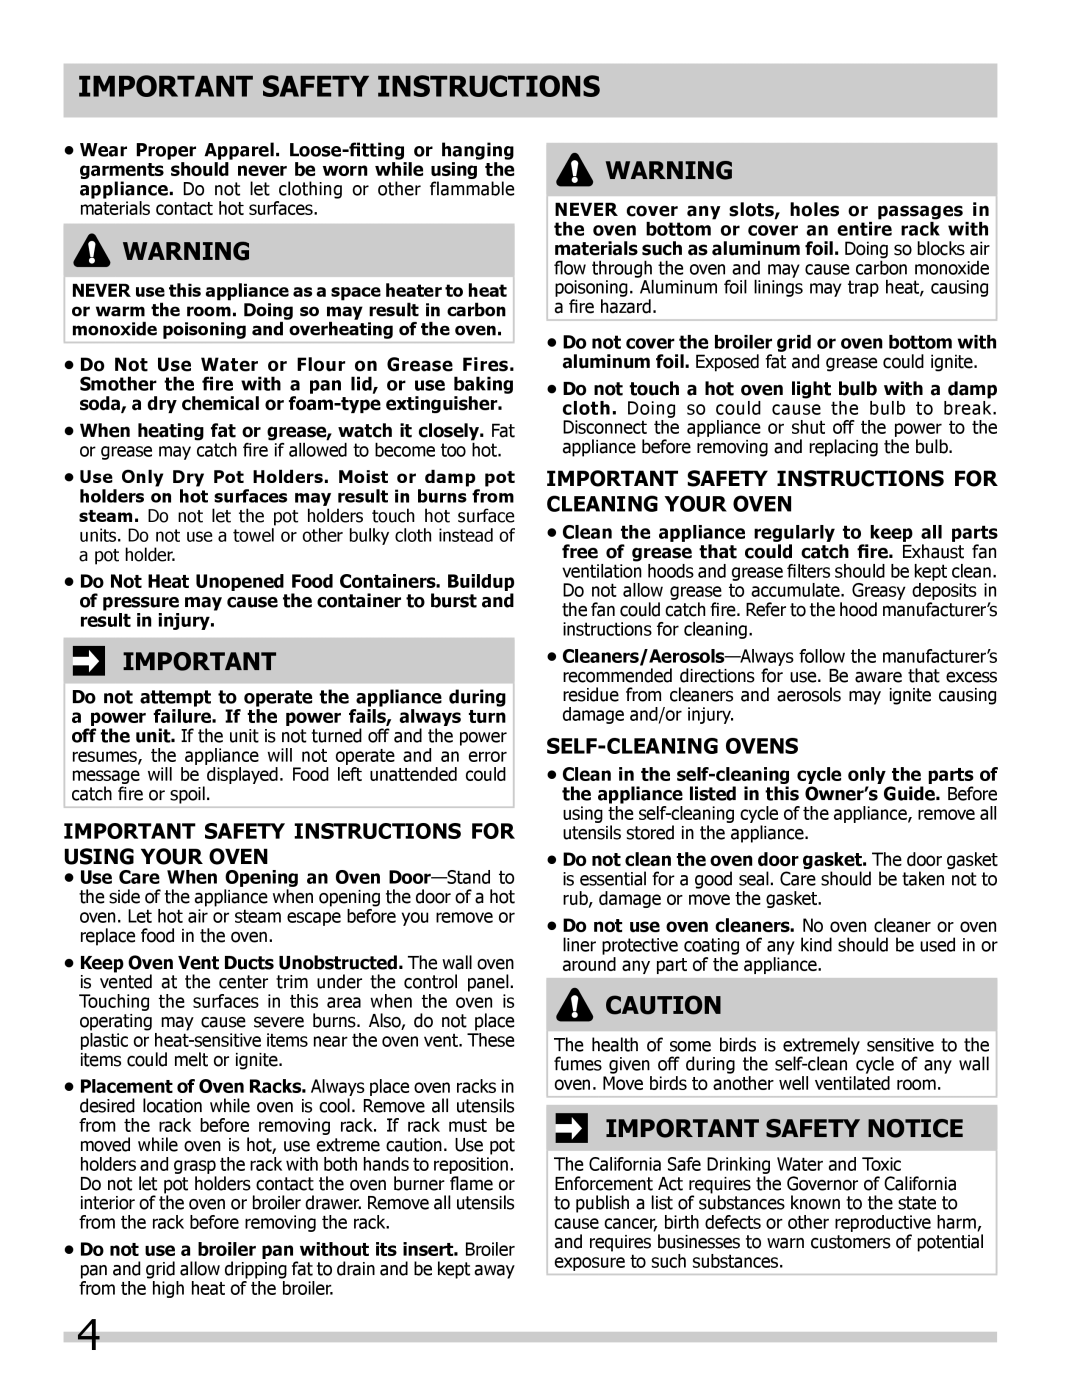 Frigidaire 318200964 Important Safety Notice, Important Safety Instructions For Using Your Oven, Self-Cleaning Ovens 